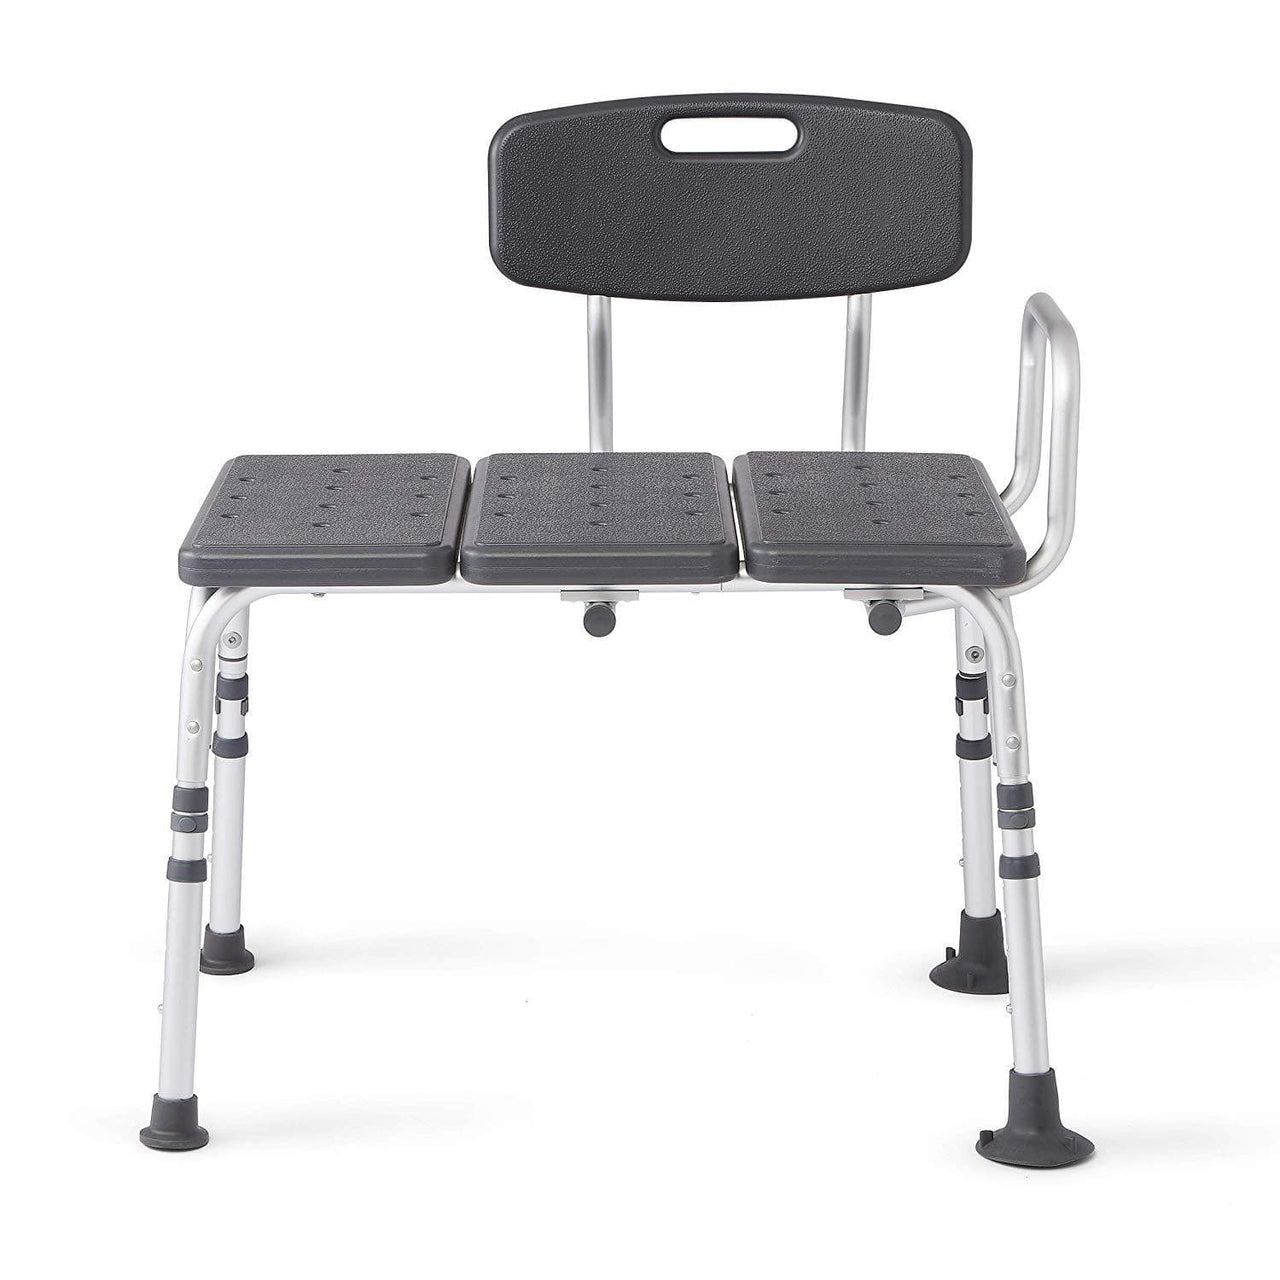 Medline Knockdown Transfer Bath Bench with Back and Microban Antimicrobial Protection - Senior.com Bath Benches & Seats